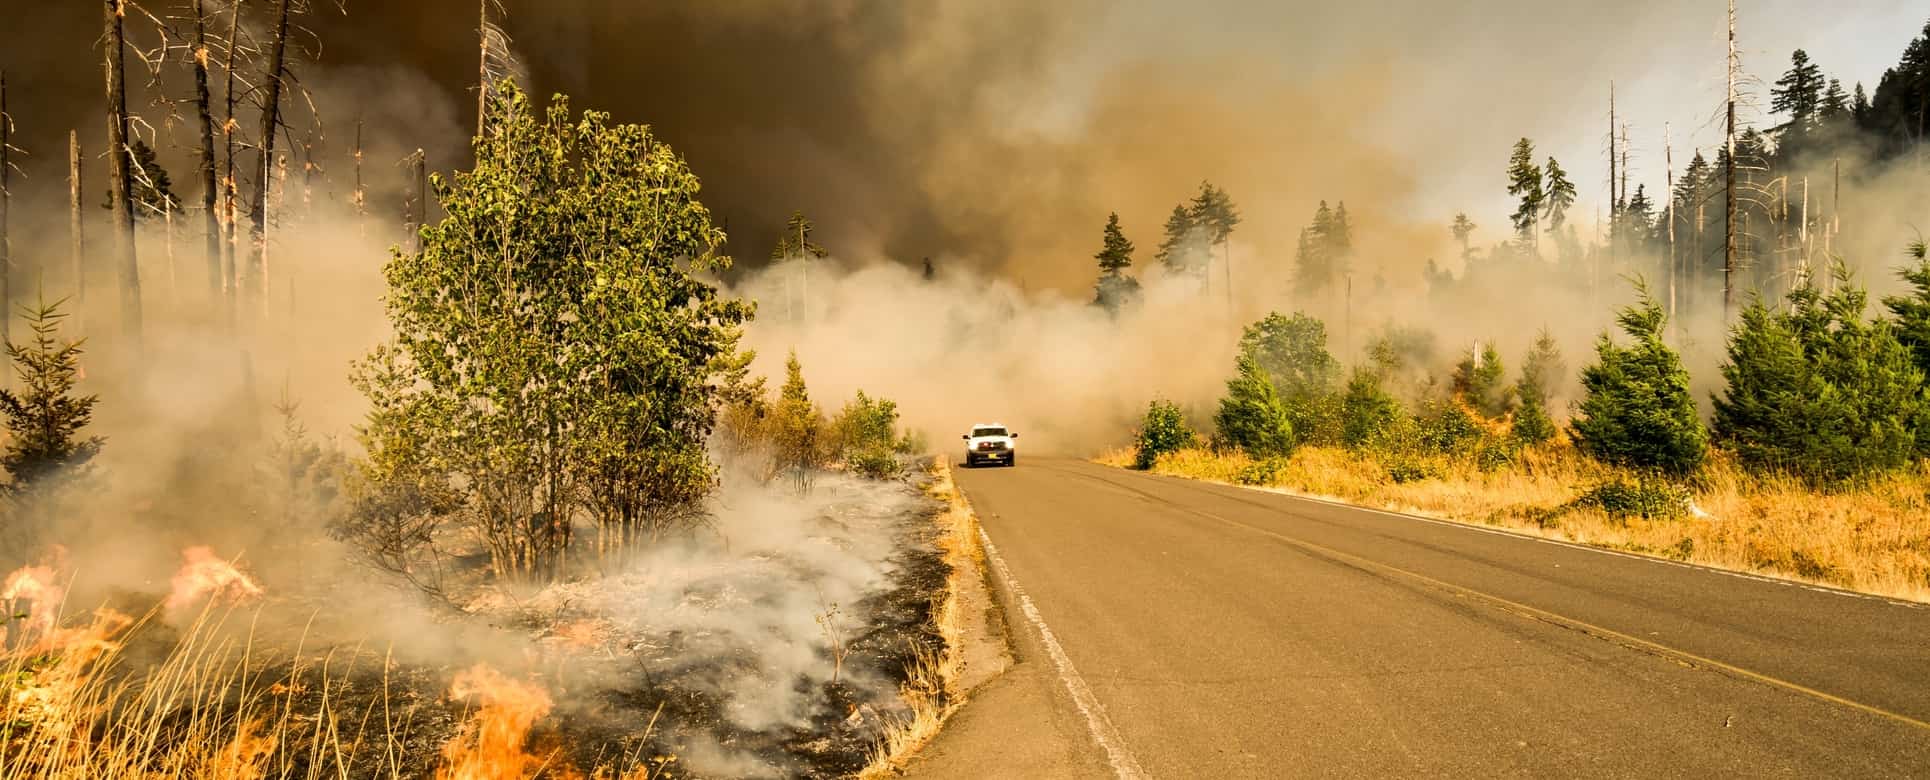 How to help with wildfires across the world?